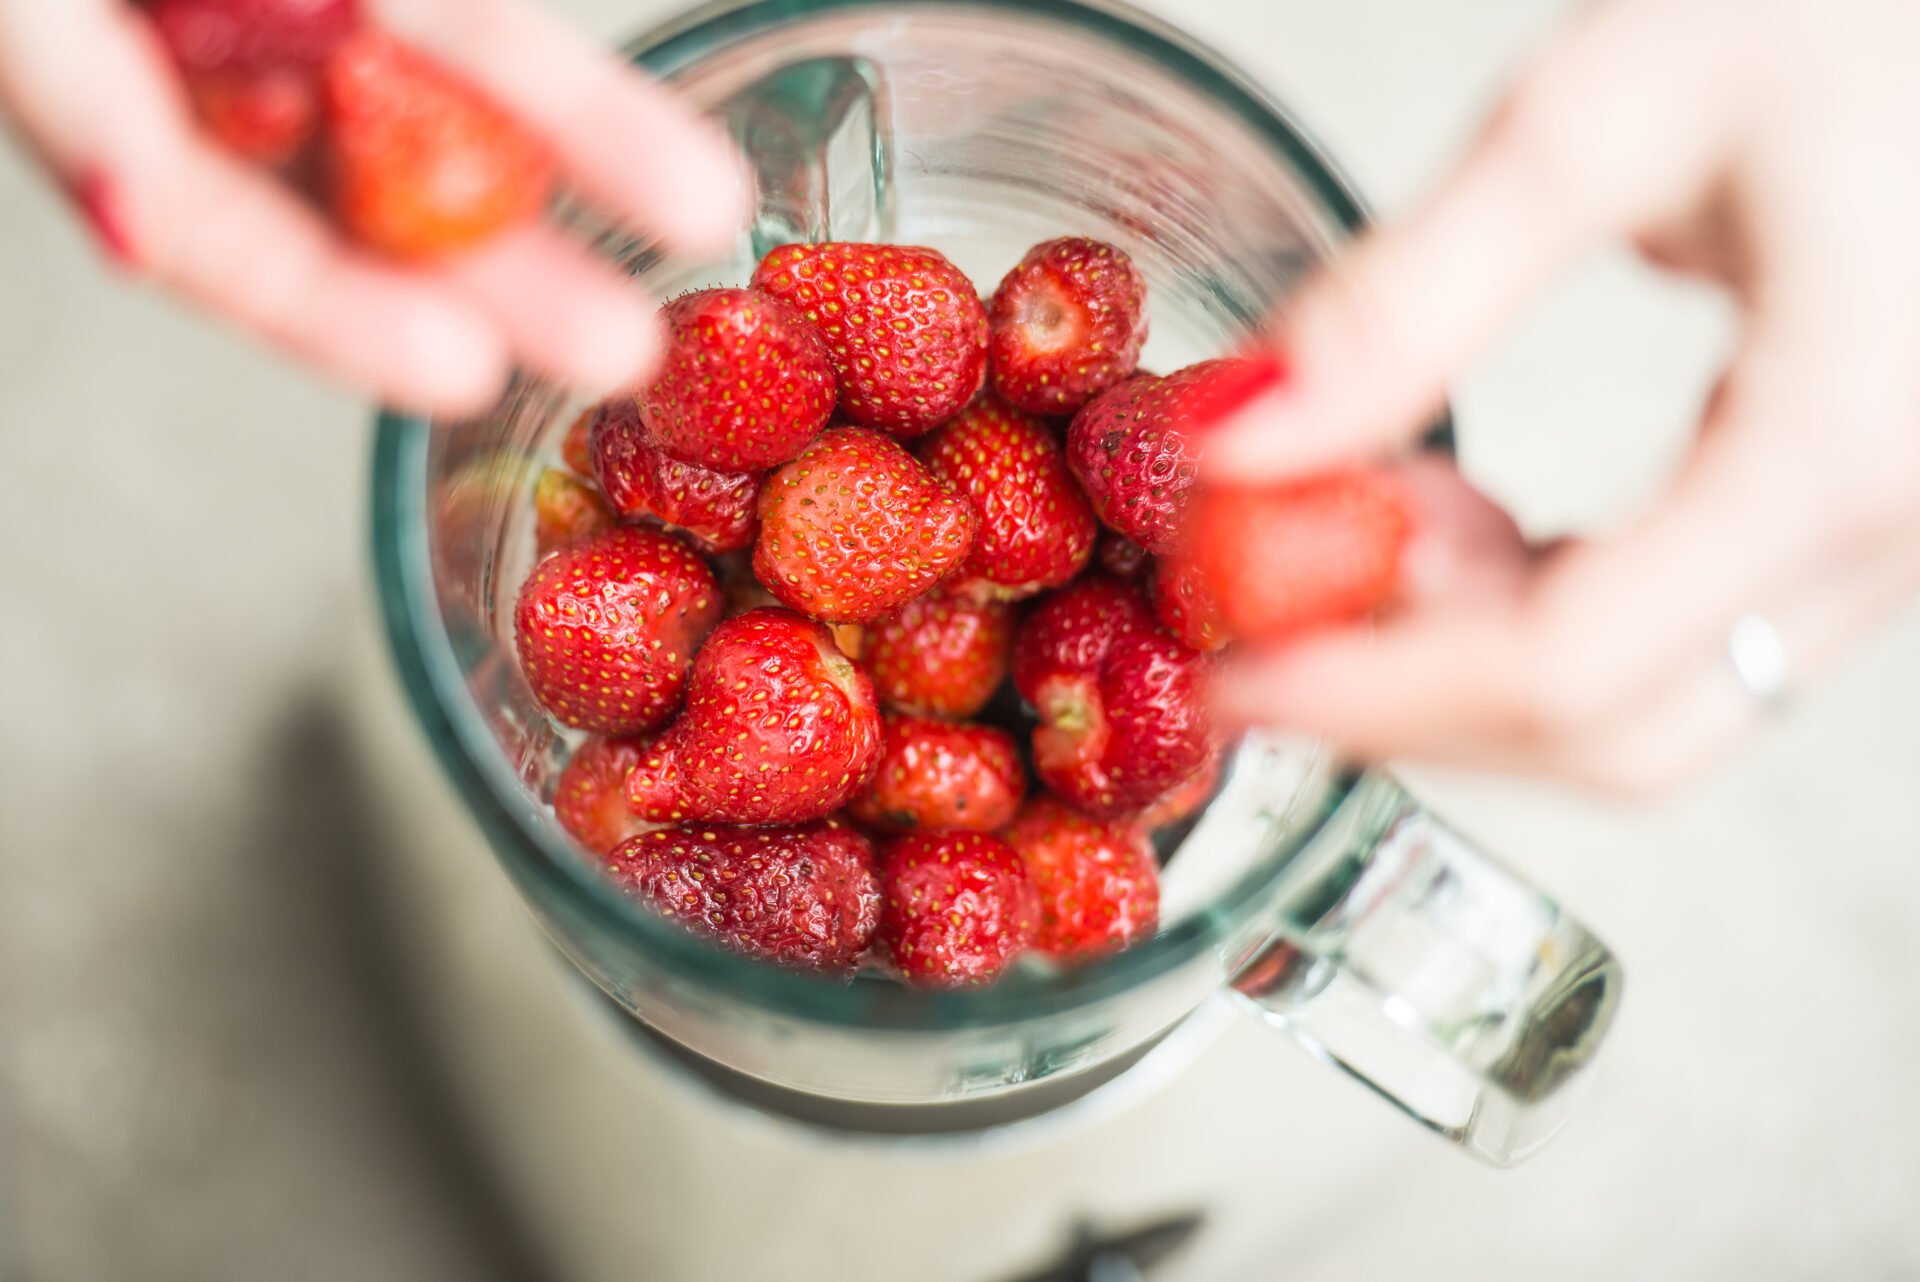 Fresh strawberries putting in blender cup and hands with some berries are blurry